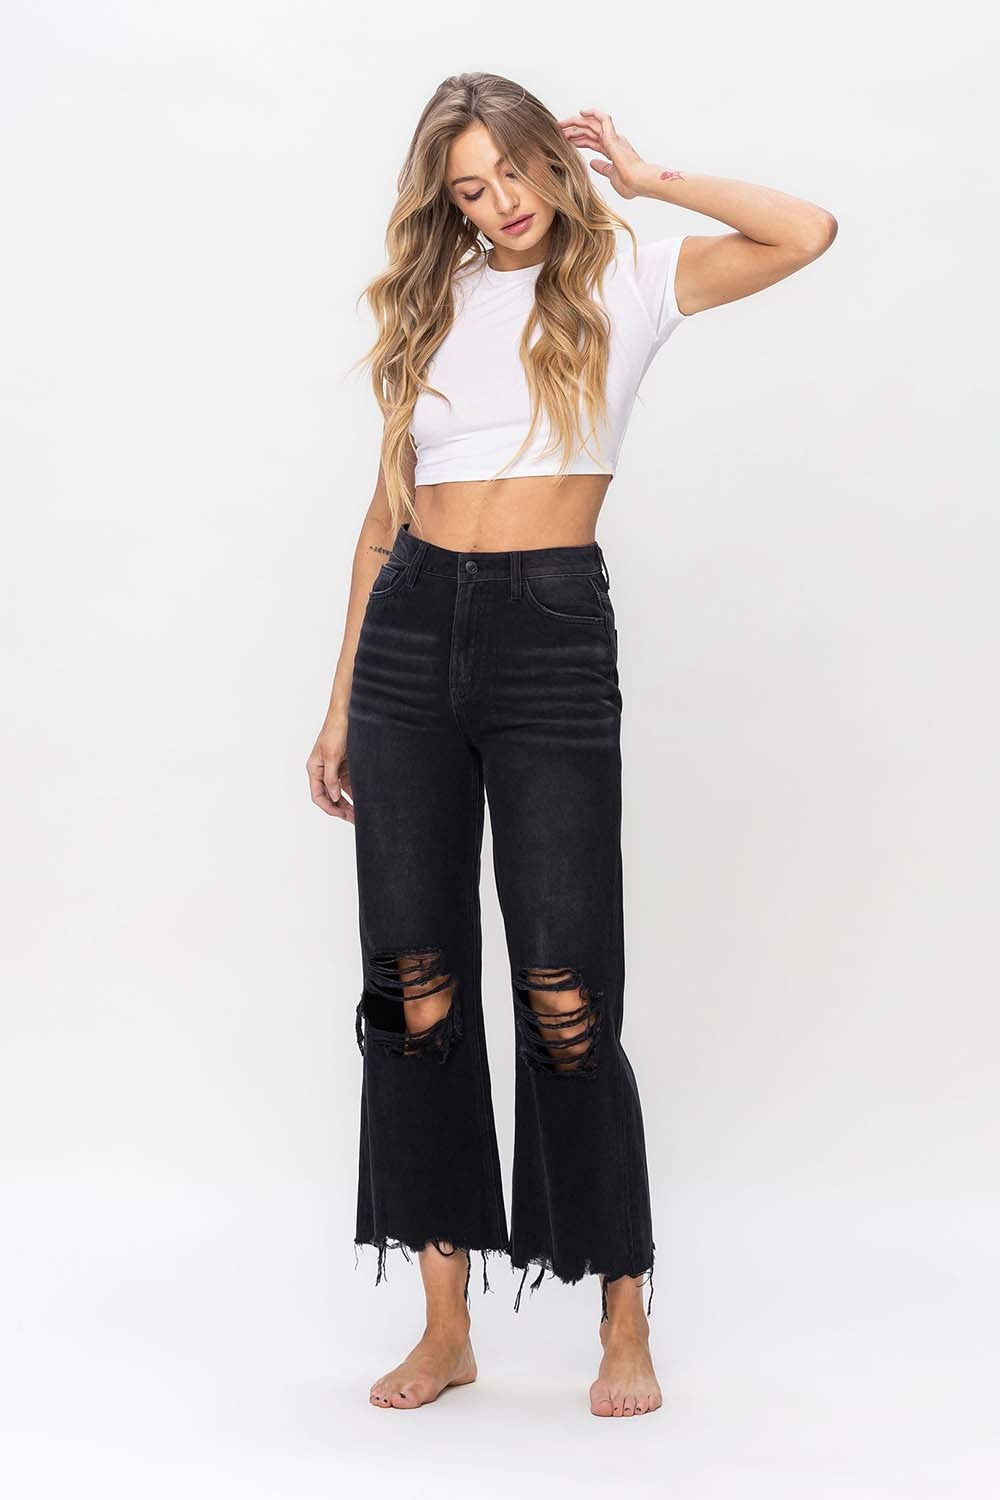 Vintage Ultra High Waist Distressed Crop Flare Jeans for Women | Jeans | Ro + Ivy